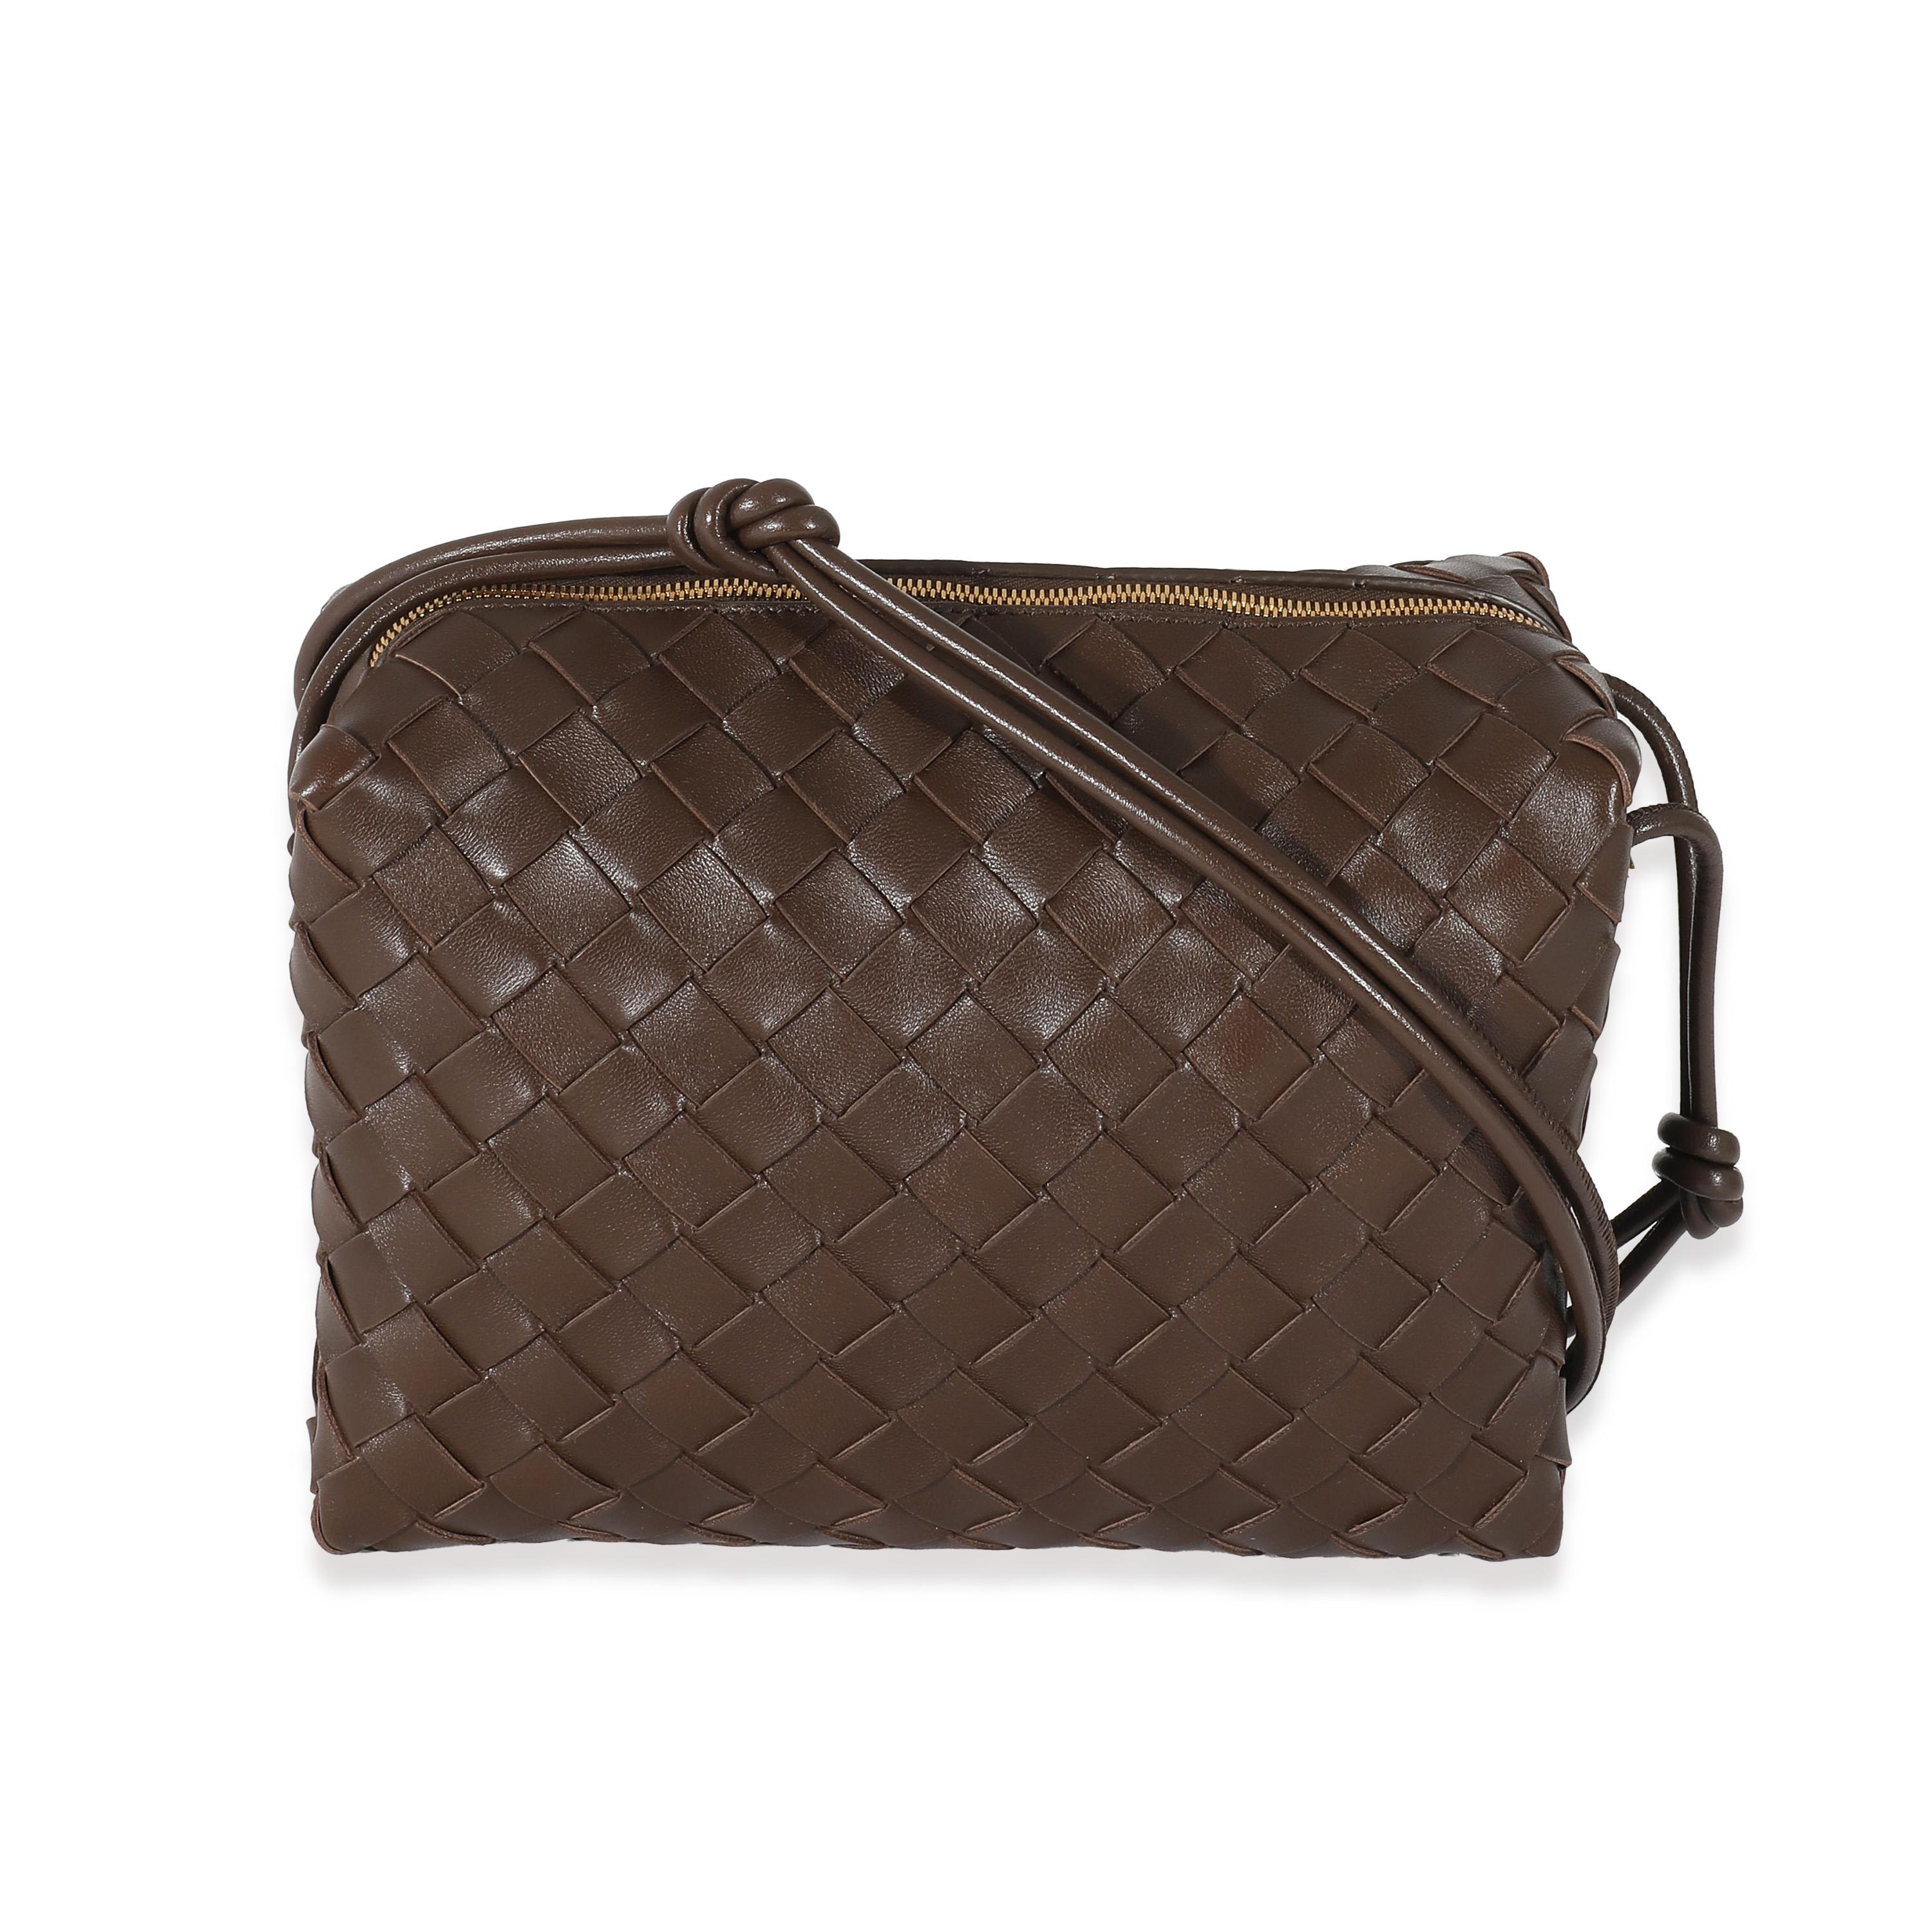 Listing Title: Bottega Veneta Brown Intrecciato Lambskin Small Loop Camera Bag
SKU: 132314
MSRP: 2700.00 USD
Condition: Pre-owned 
Handbag Condition: Pristine
Condition Comments: Item has no indication of wear. No visible signs of wear.
Brand: